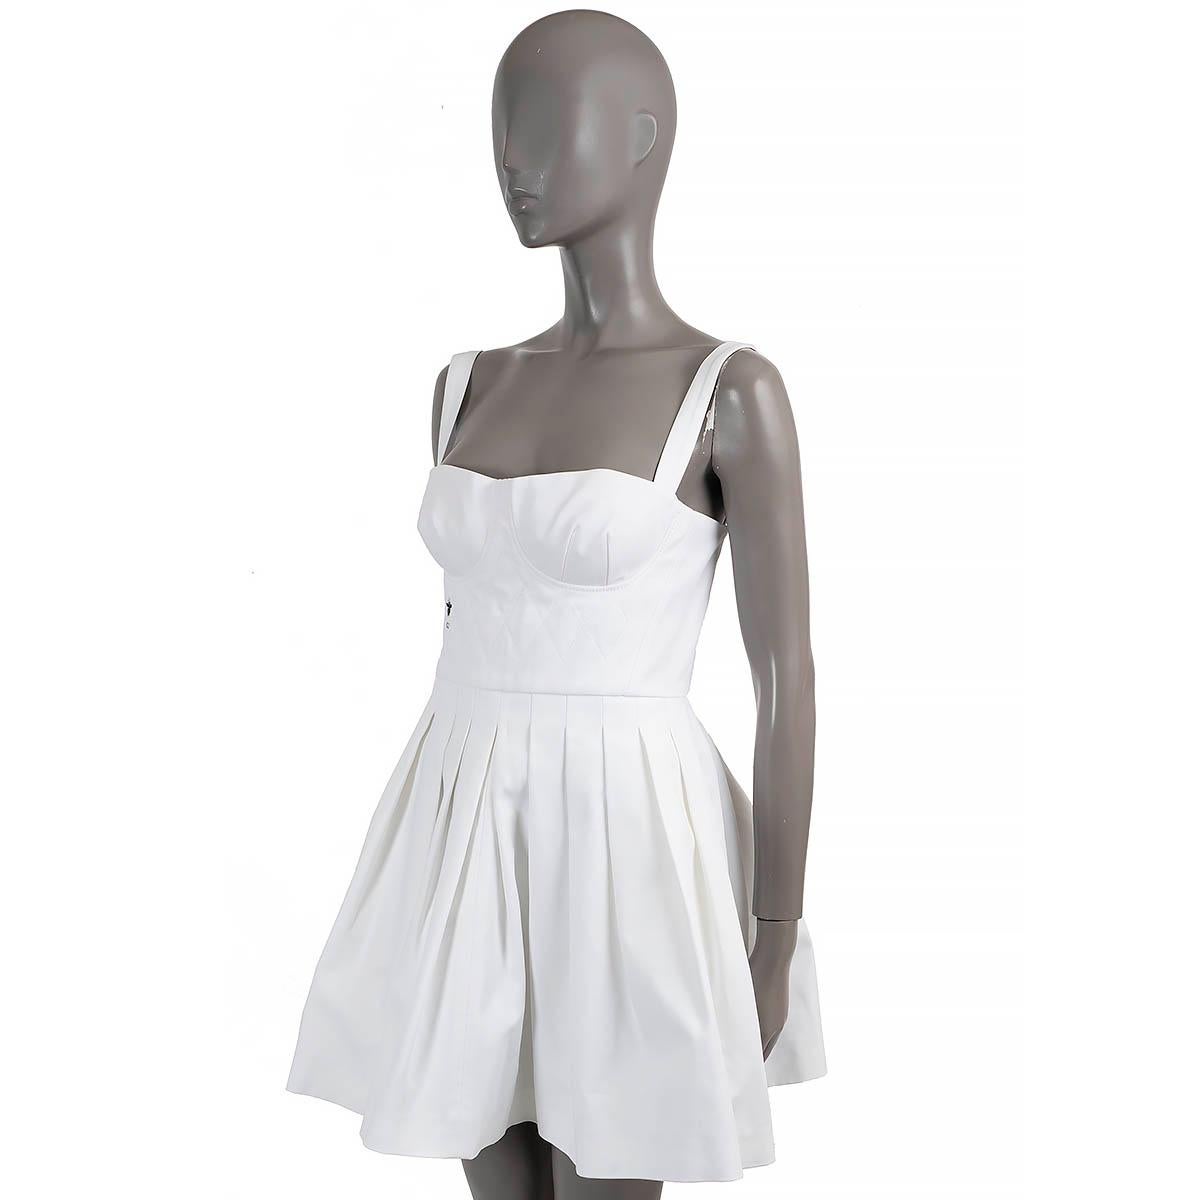 100% authentic Christian Dior sleeveless bustier mini dress in white cotton (100%). Features a quilted bustier top with CD Bee embroidery in black and a pleated skirt. Opens with a concealed zipper in the back and is unlined. Has been worn and is in